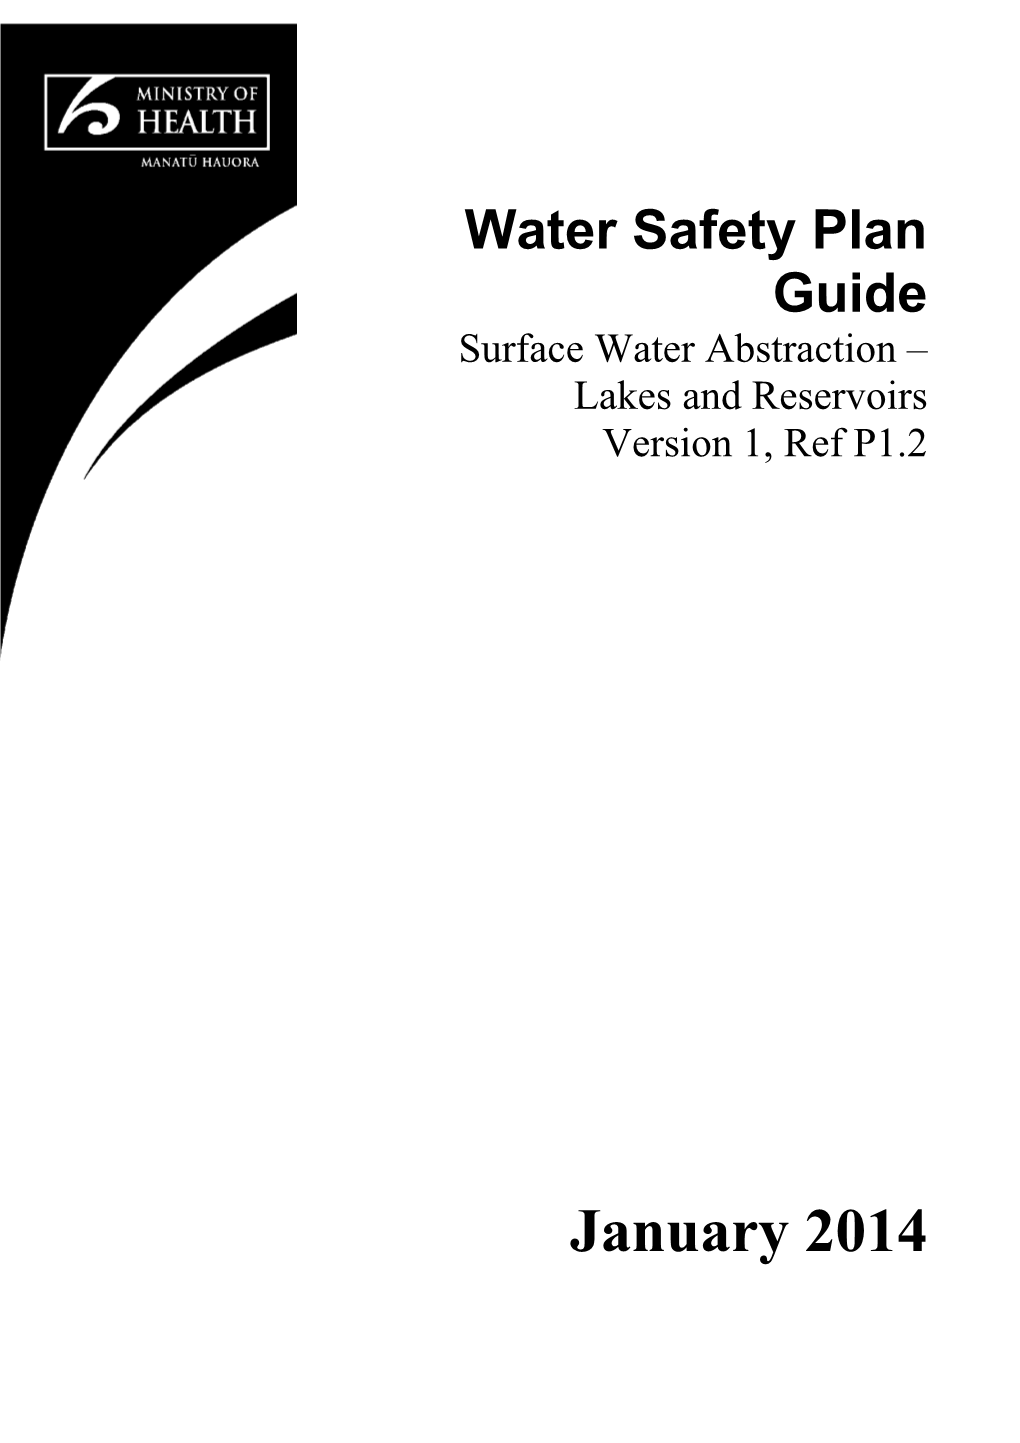 Water Safety Plan Guide: Surface Water Abstraction Lakes and Reservoirs